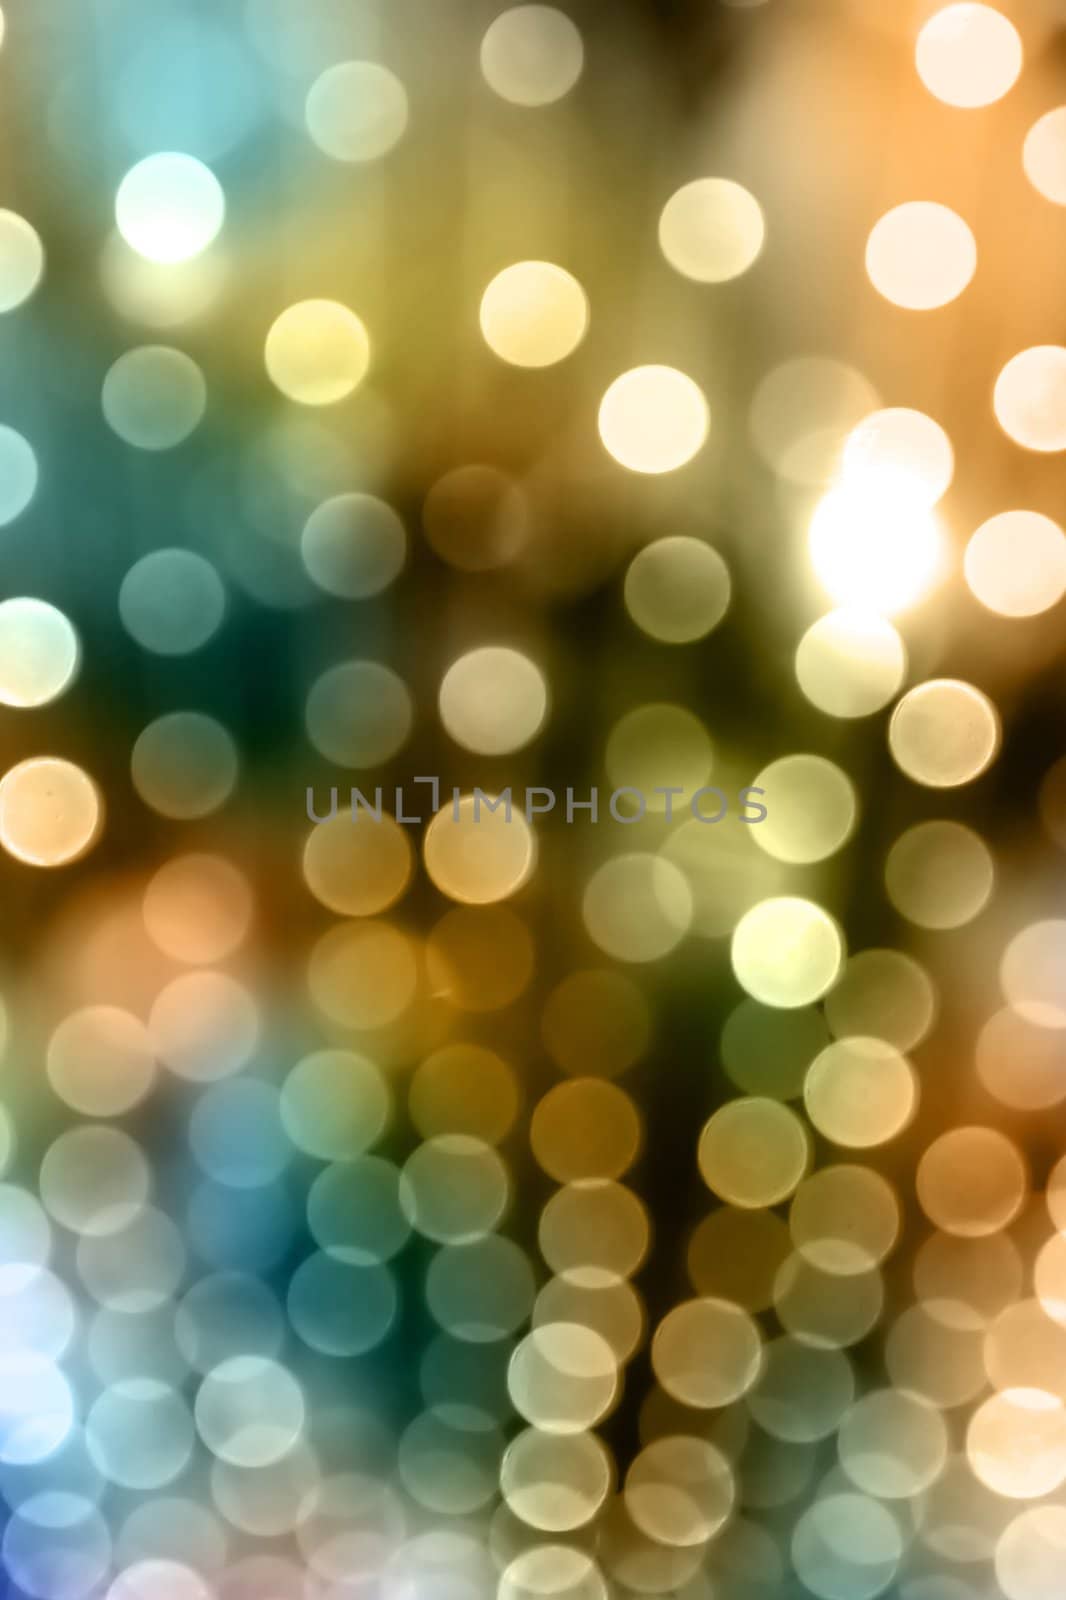 Abstract background - out of focus christmas lights